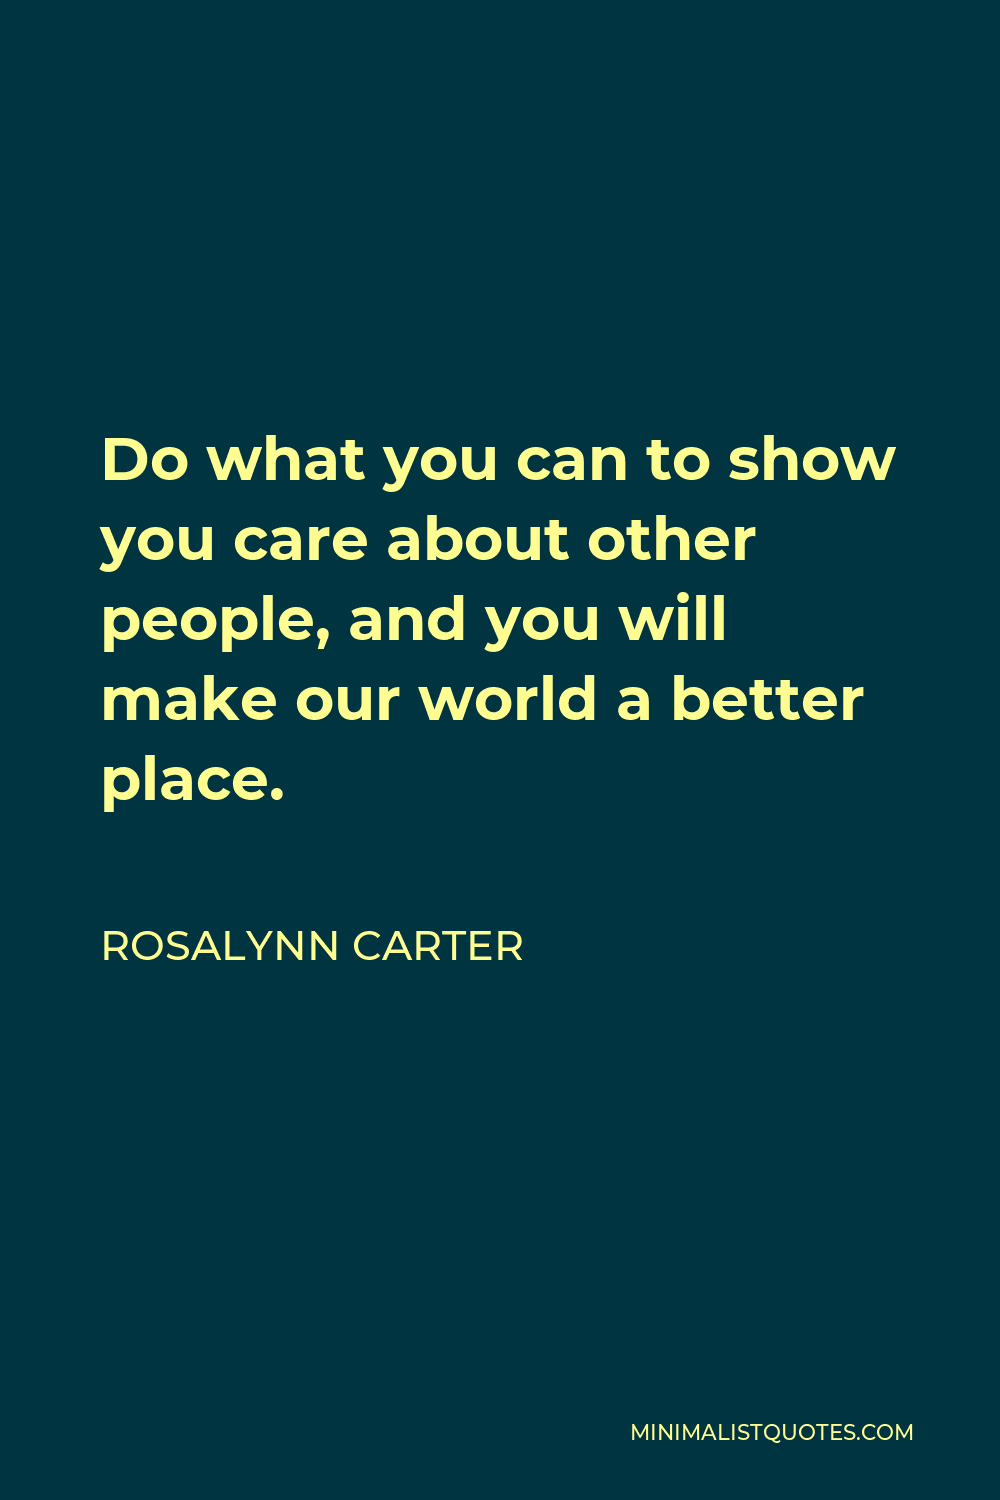 Rosalynn Carter Quote - Do what you can to show you care about other people, and you will make our world a better place.